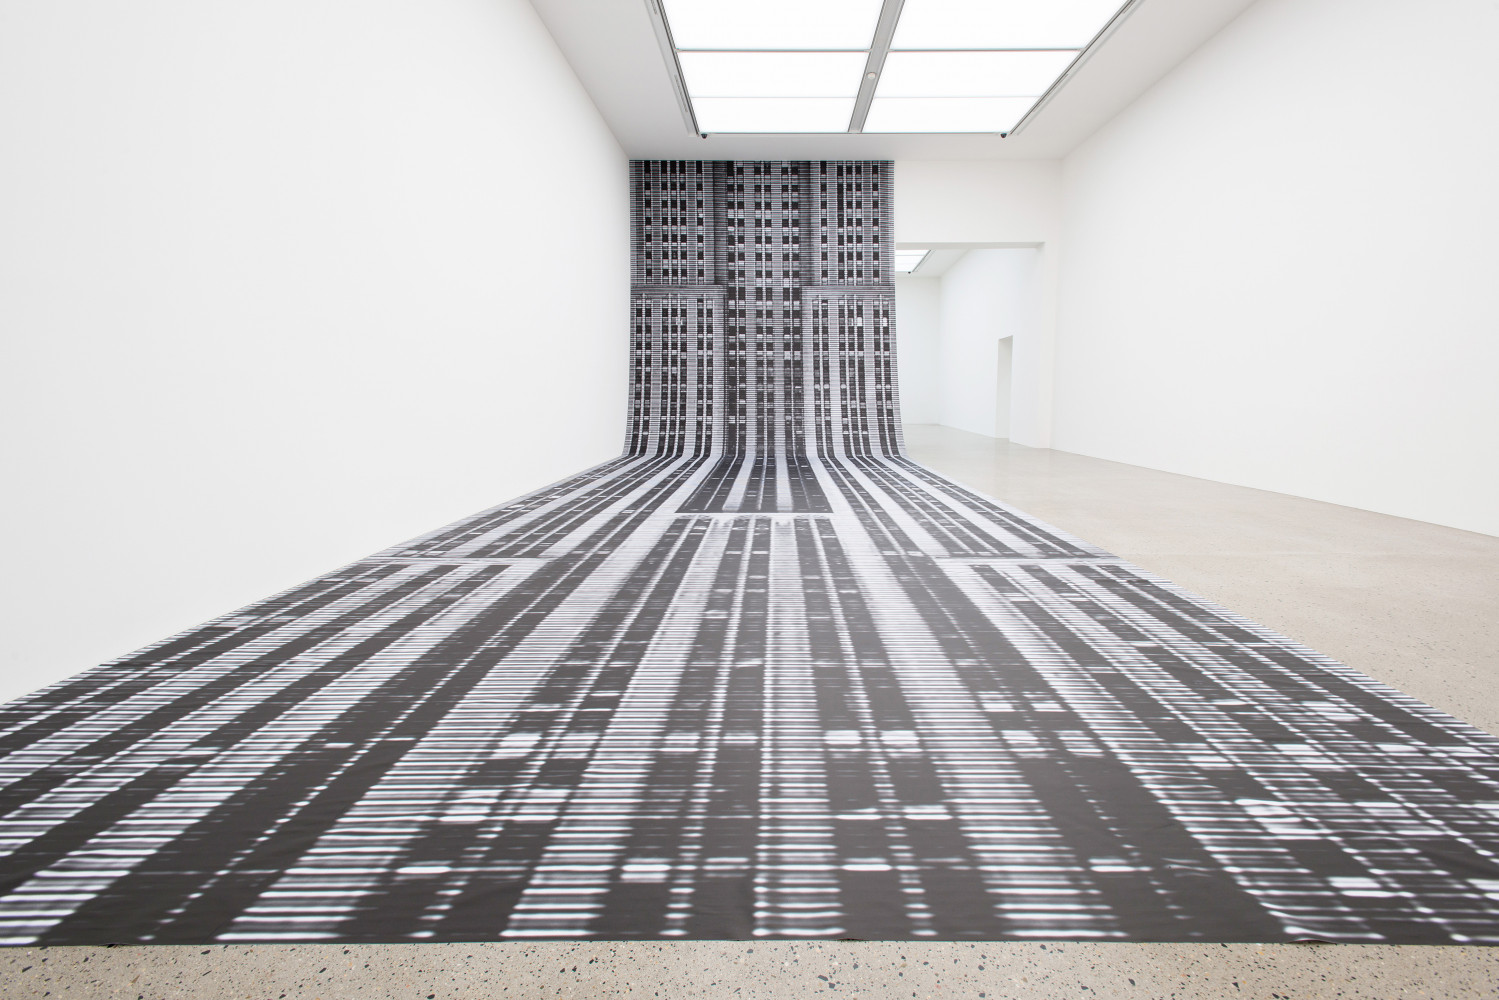 Bettina Pousttchi, ‘Sleeping Empire, Sprengel Museum Hannover’, 2015